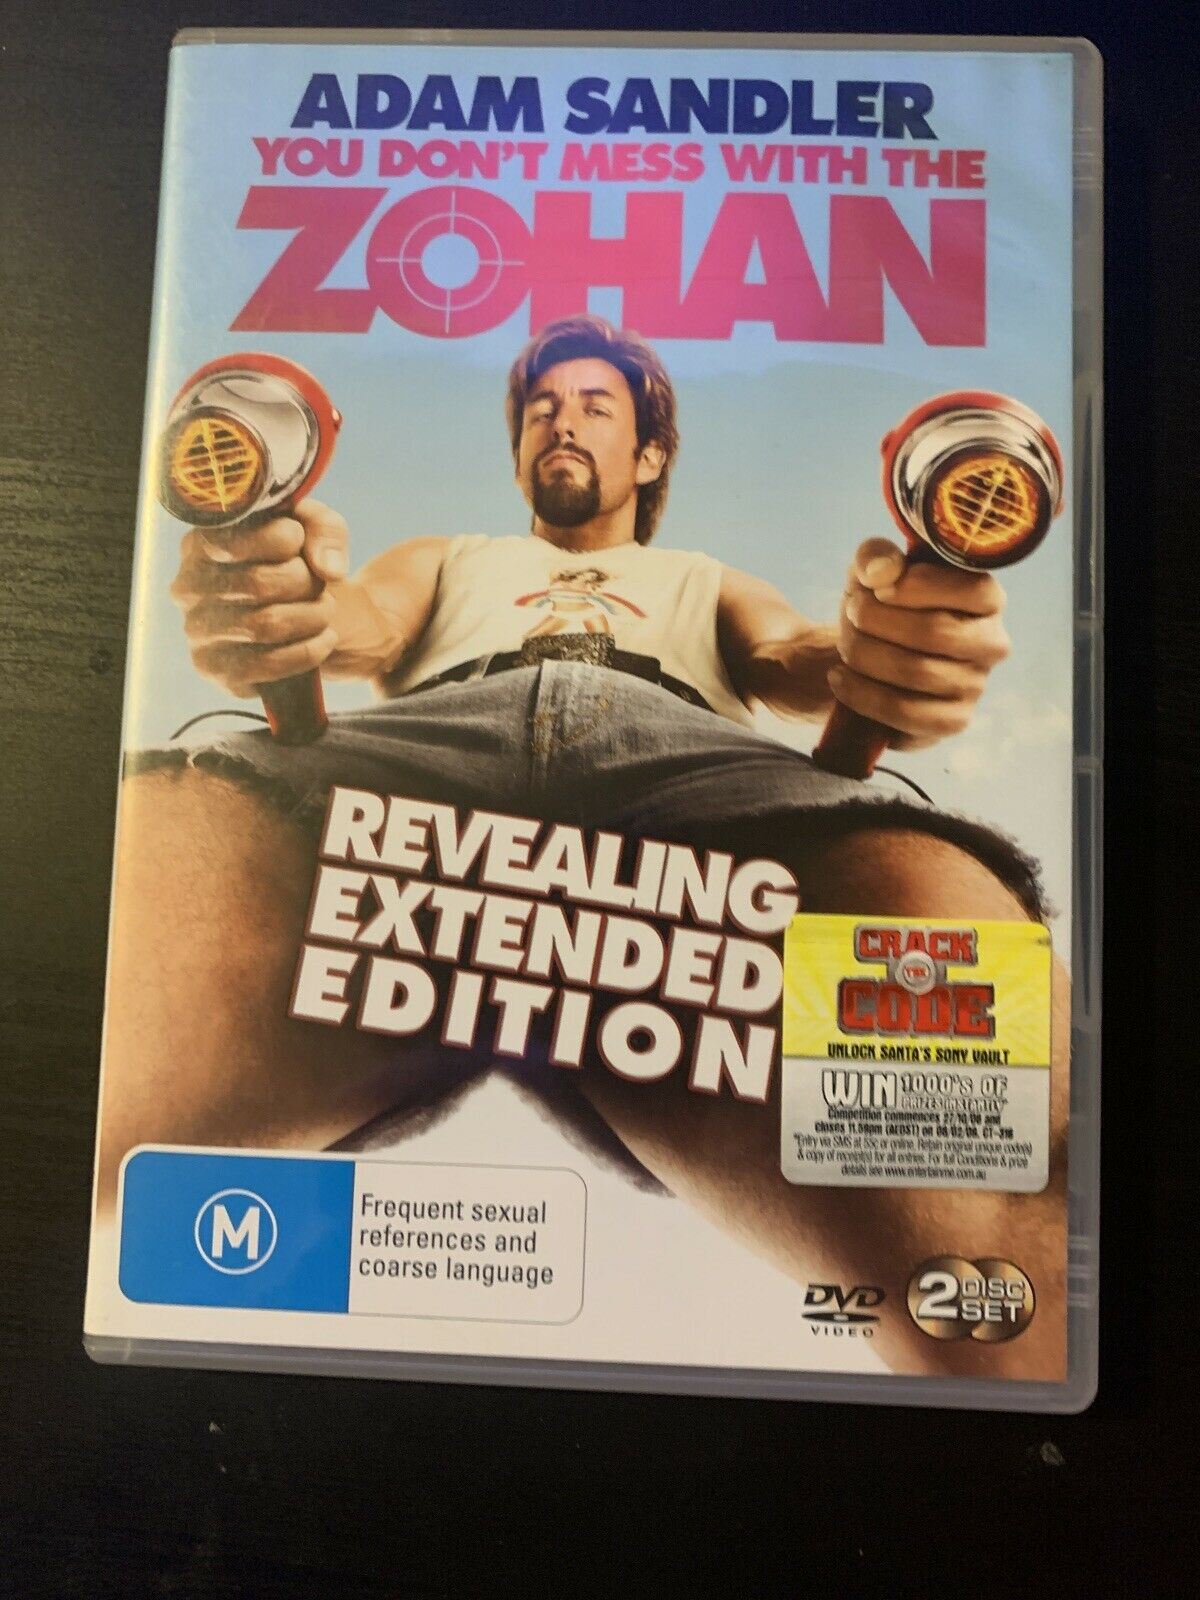 You Don't Mess with the Zohan - Revealing Extended Edition (DVD, 2008) Region 4